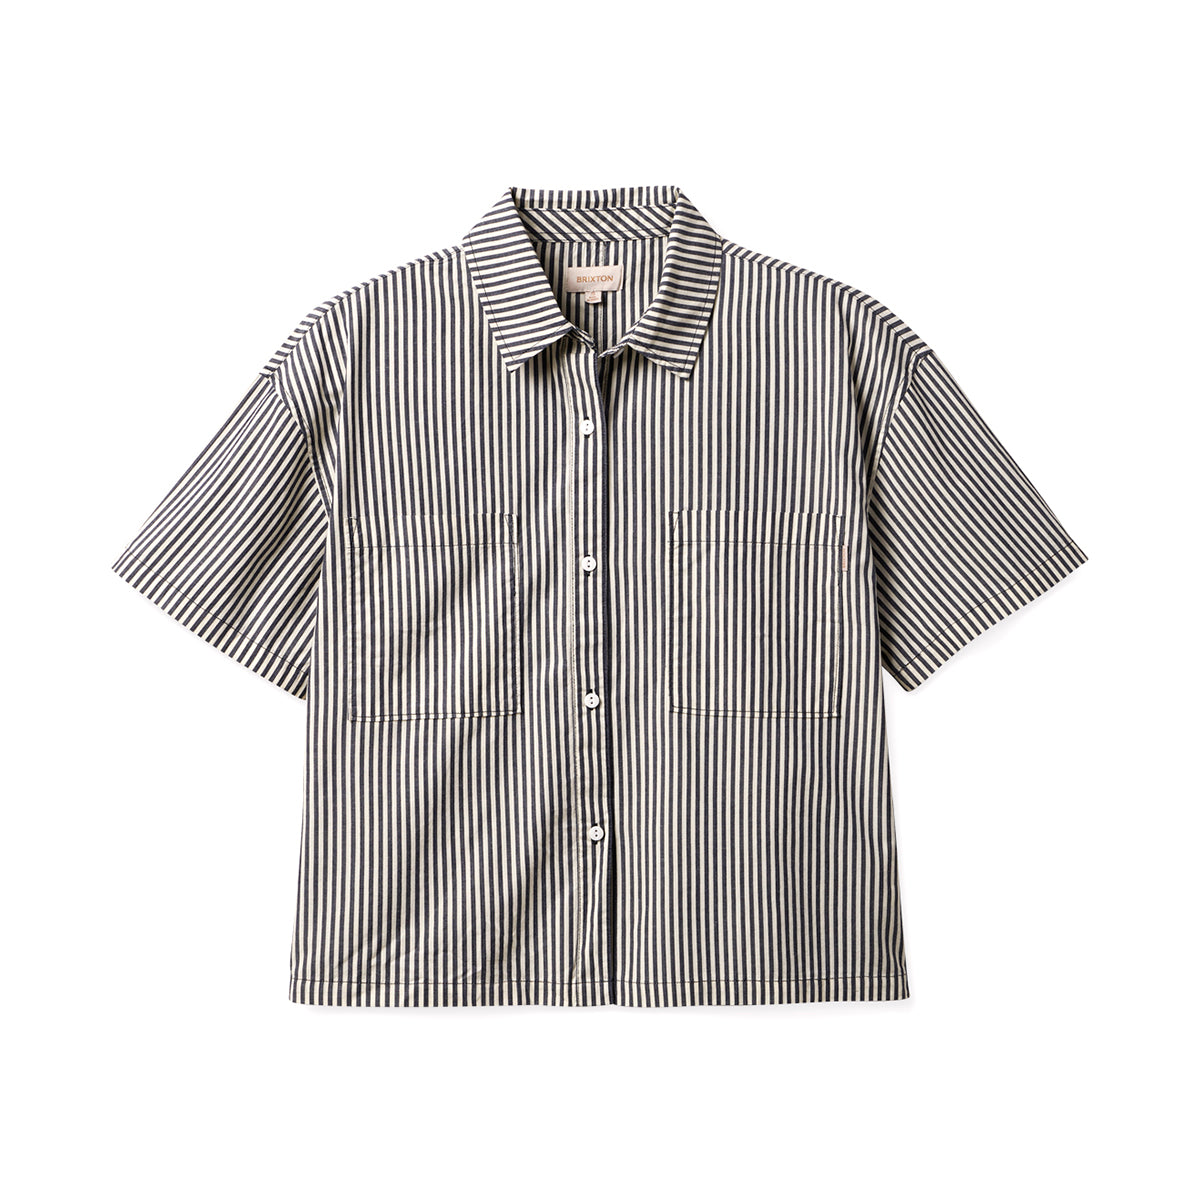 SIDNEY S/S WOVEN